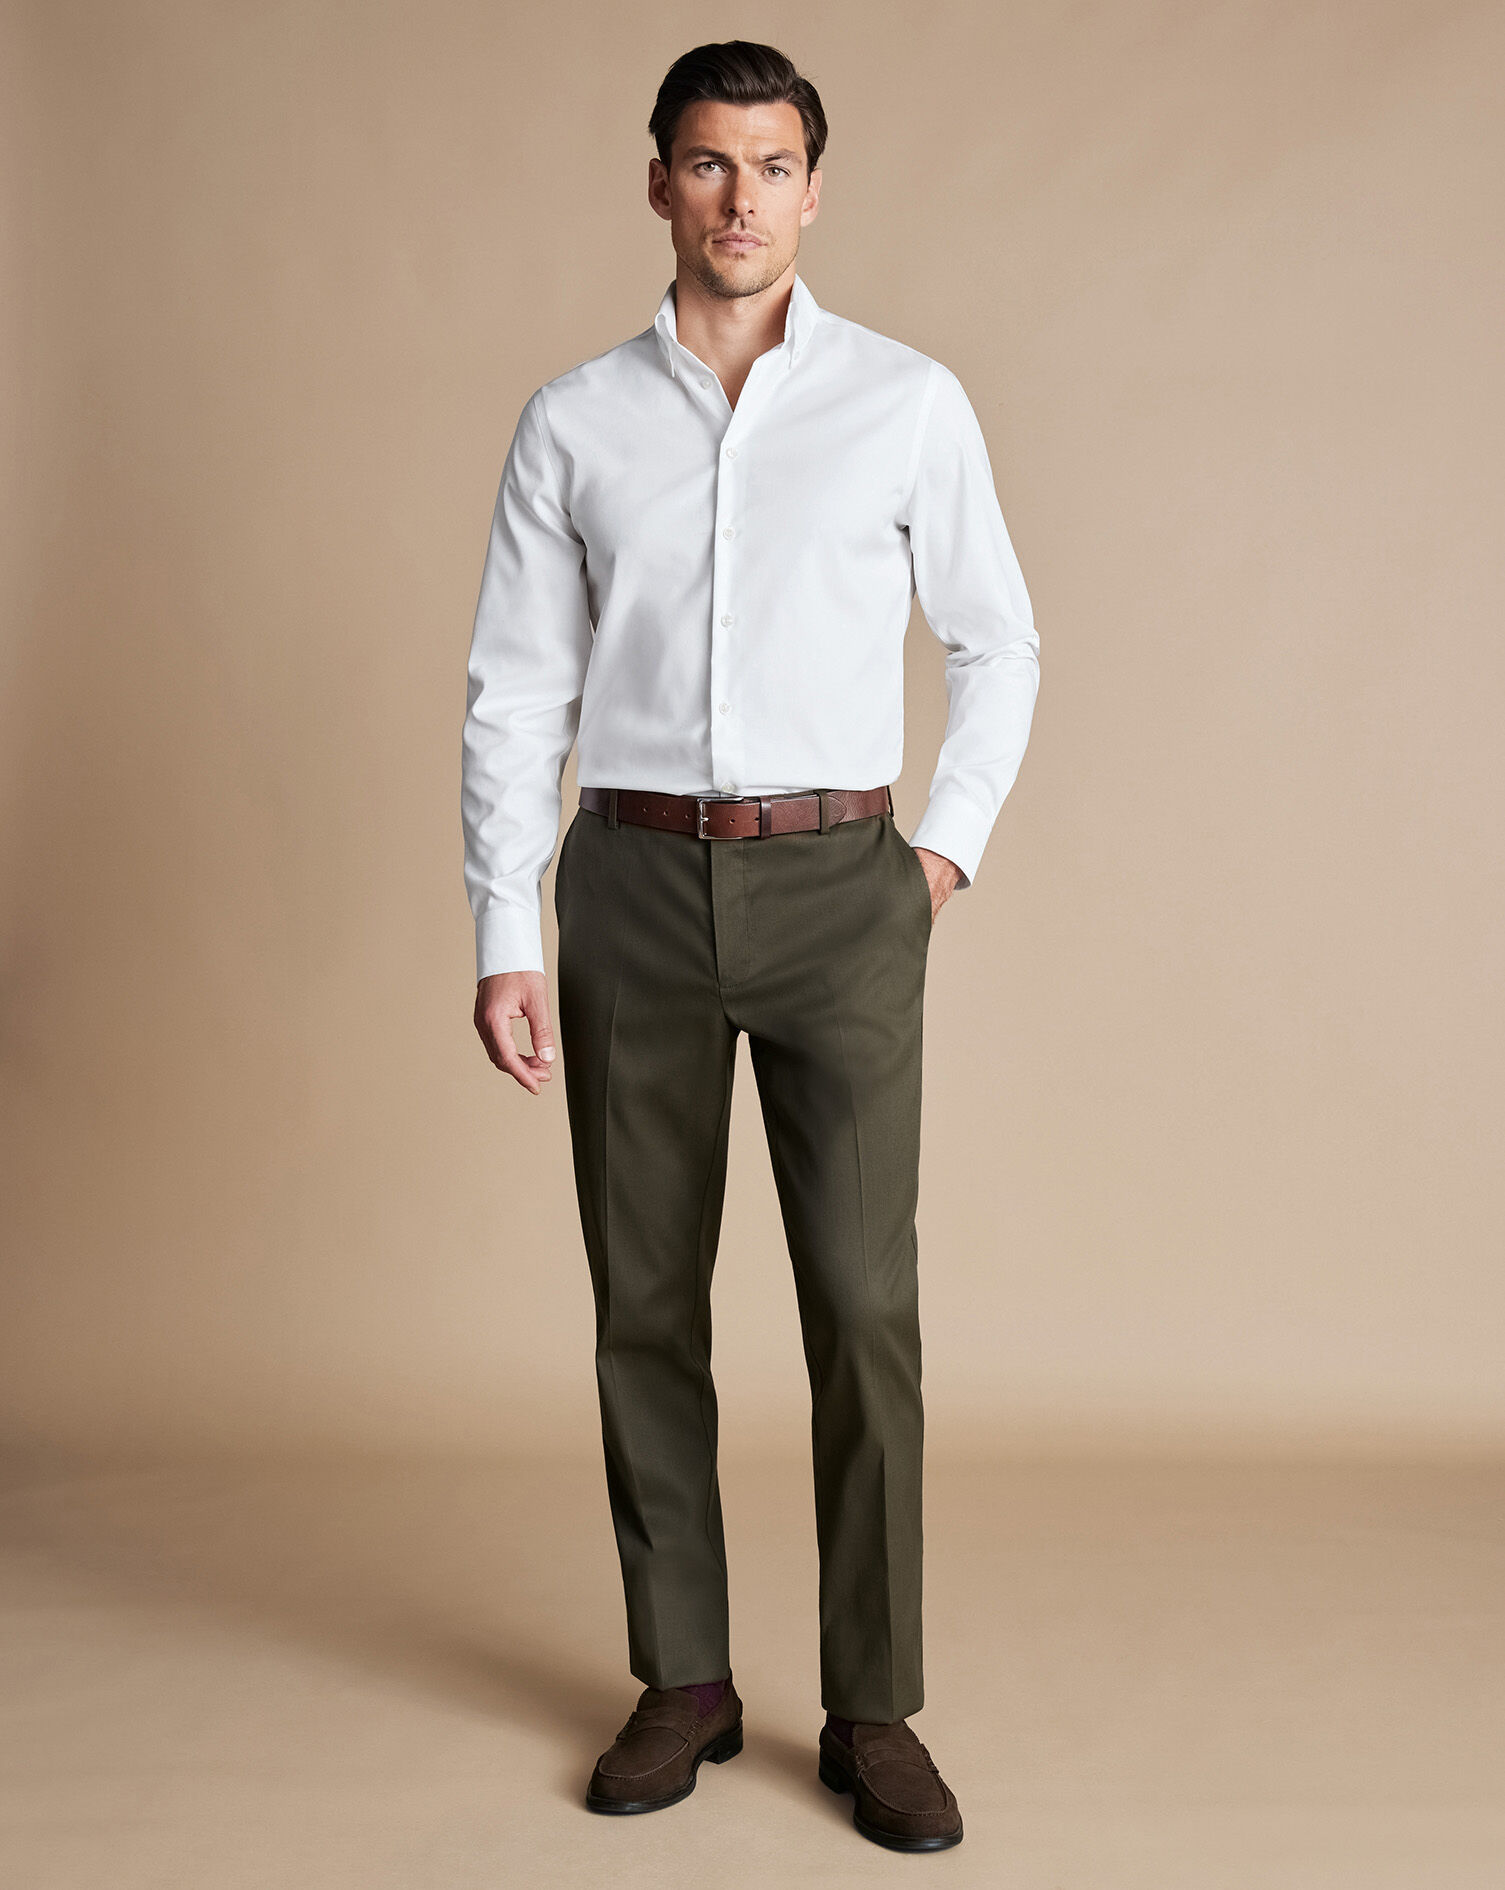 Green Pants Outfit / Suit Dress To Impress The Pants Of Your Dreams | Brown  pants men, Green trousers outfit, Dark brown pants